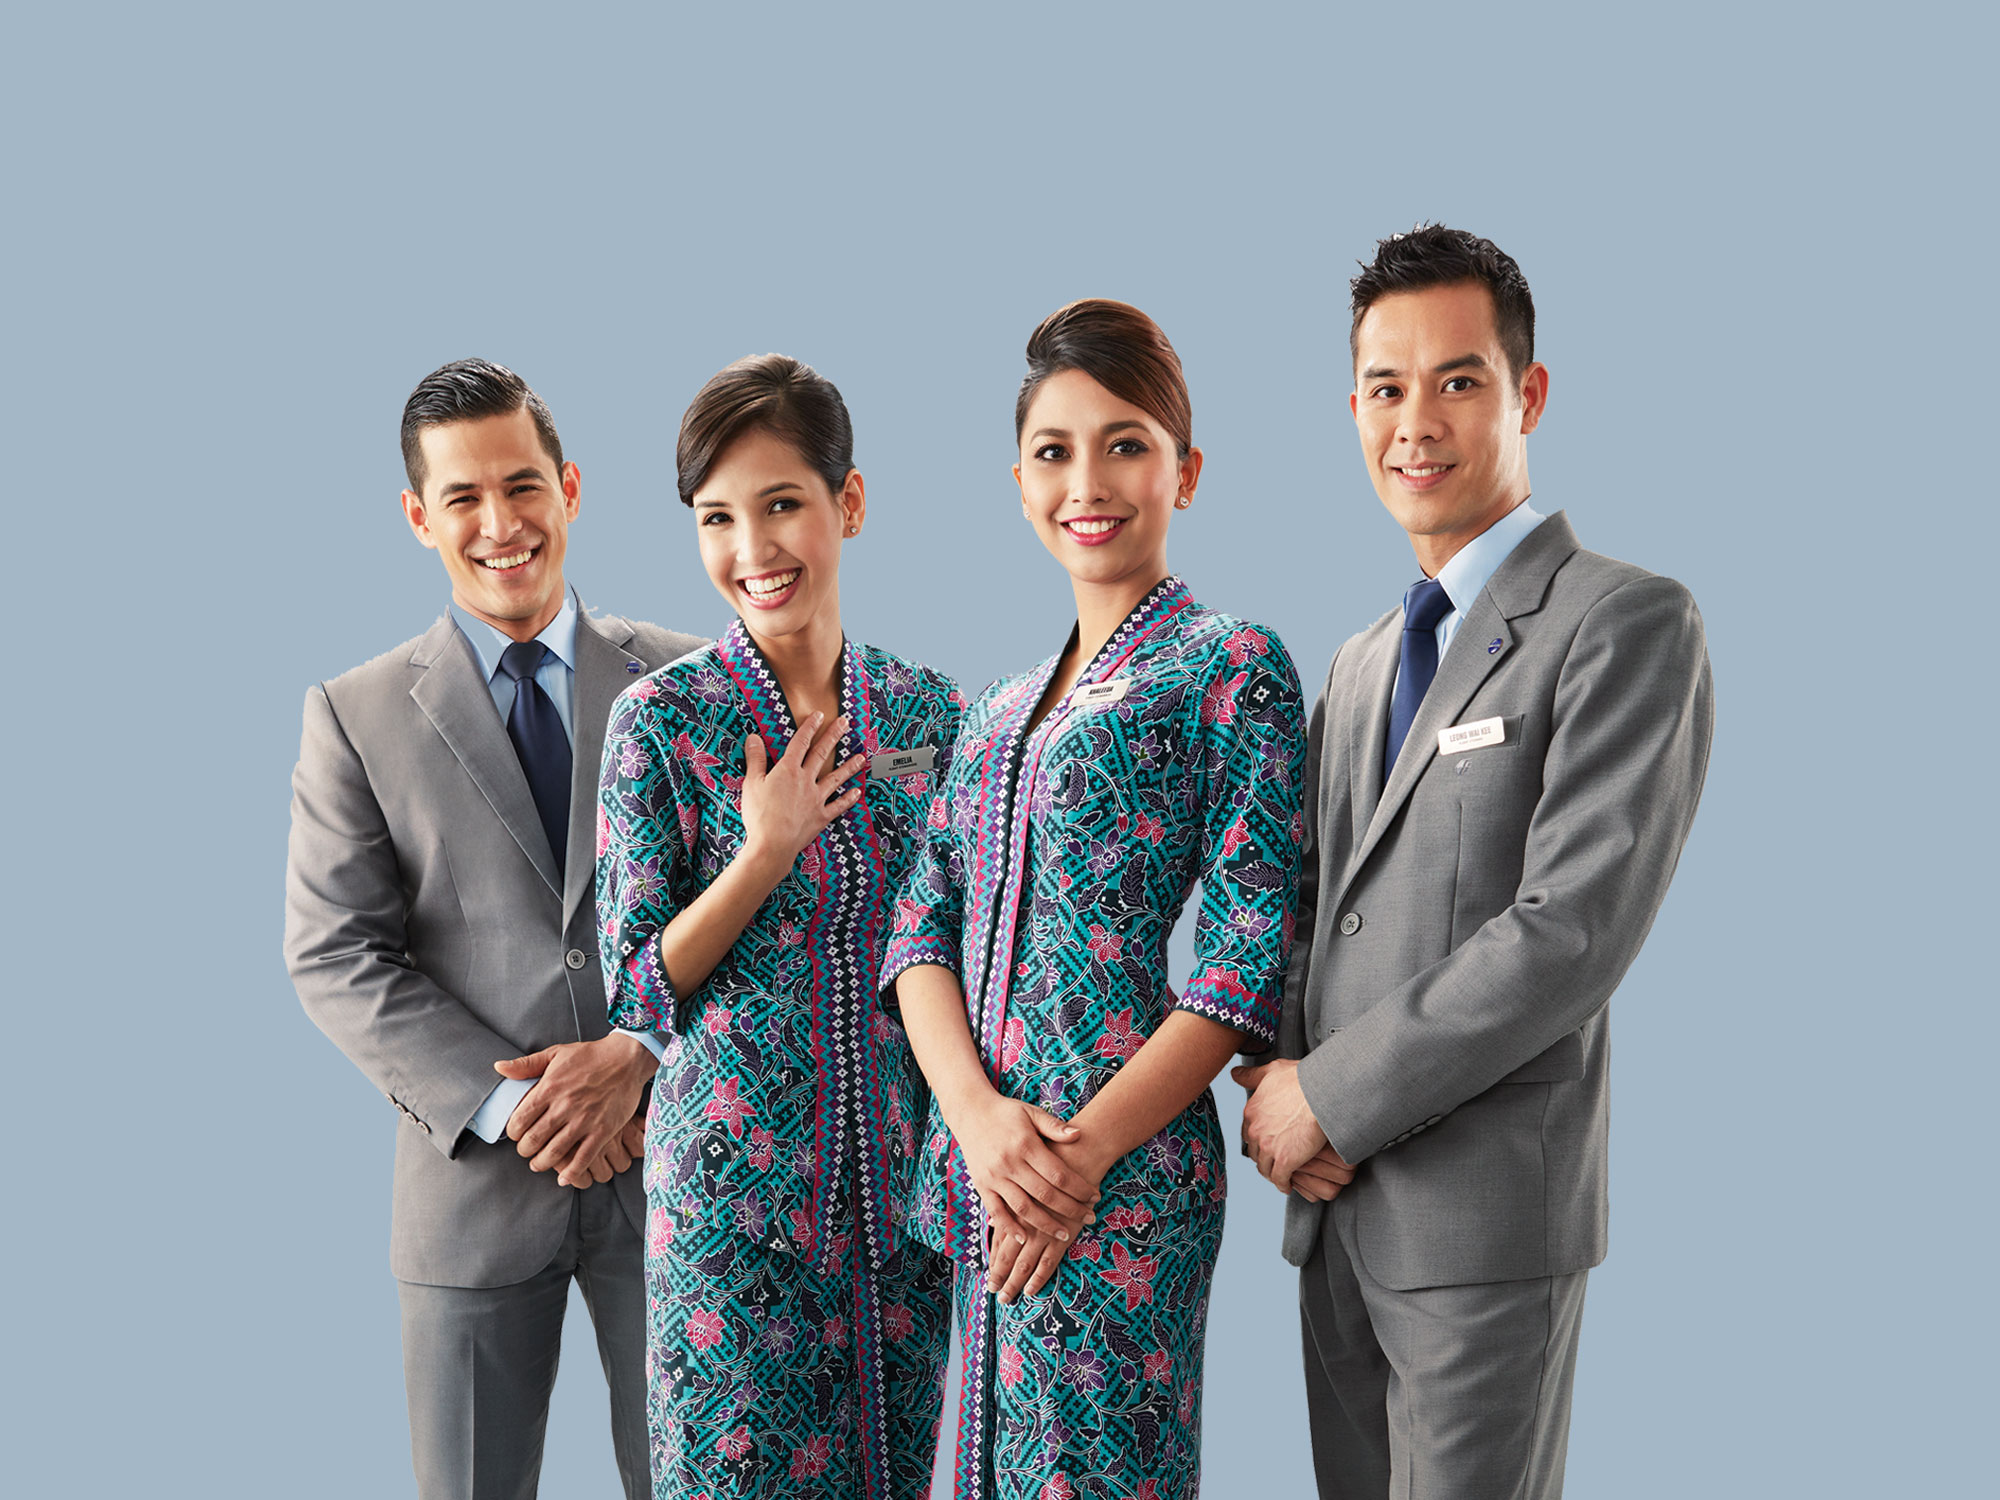 Image by Malaysia Airlines